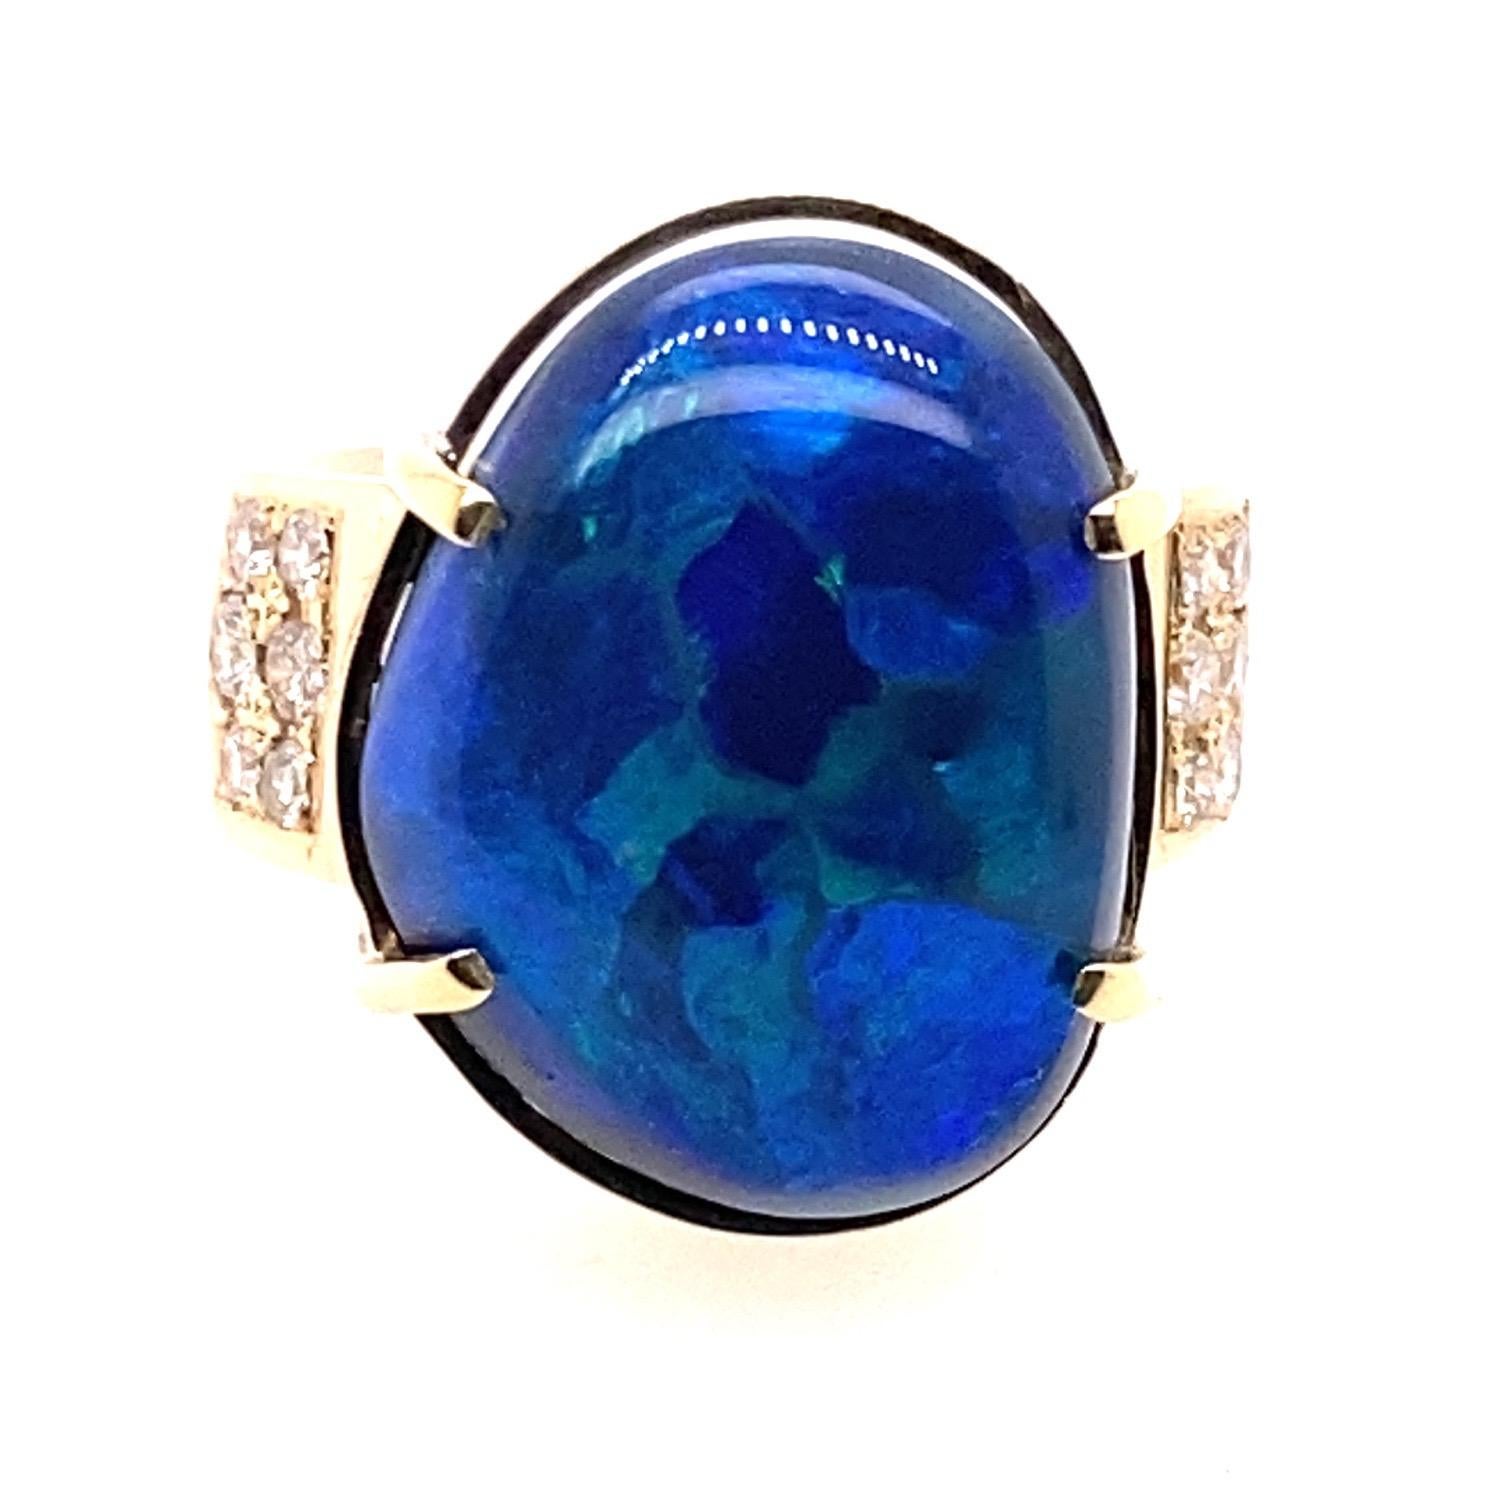 18 Karat Yellow Gold 23 Carat Australian Black Opal Diamond Cocktail Ring

Handmade 18kt yellow gold ring. The center stone is a solid 23 carat Australian black opal secured in four claw setting. Each shoulder has 6 round brilliant cut diamond in